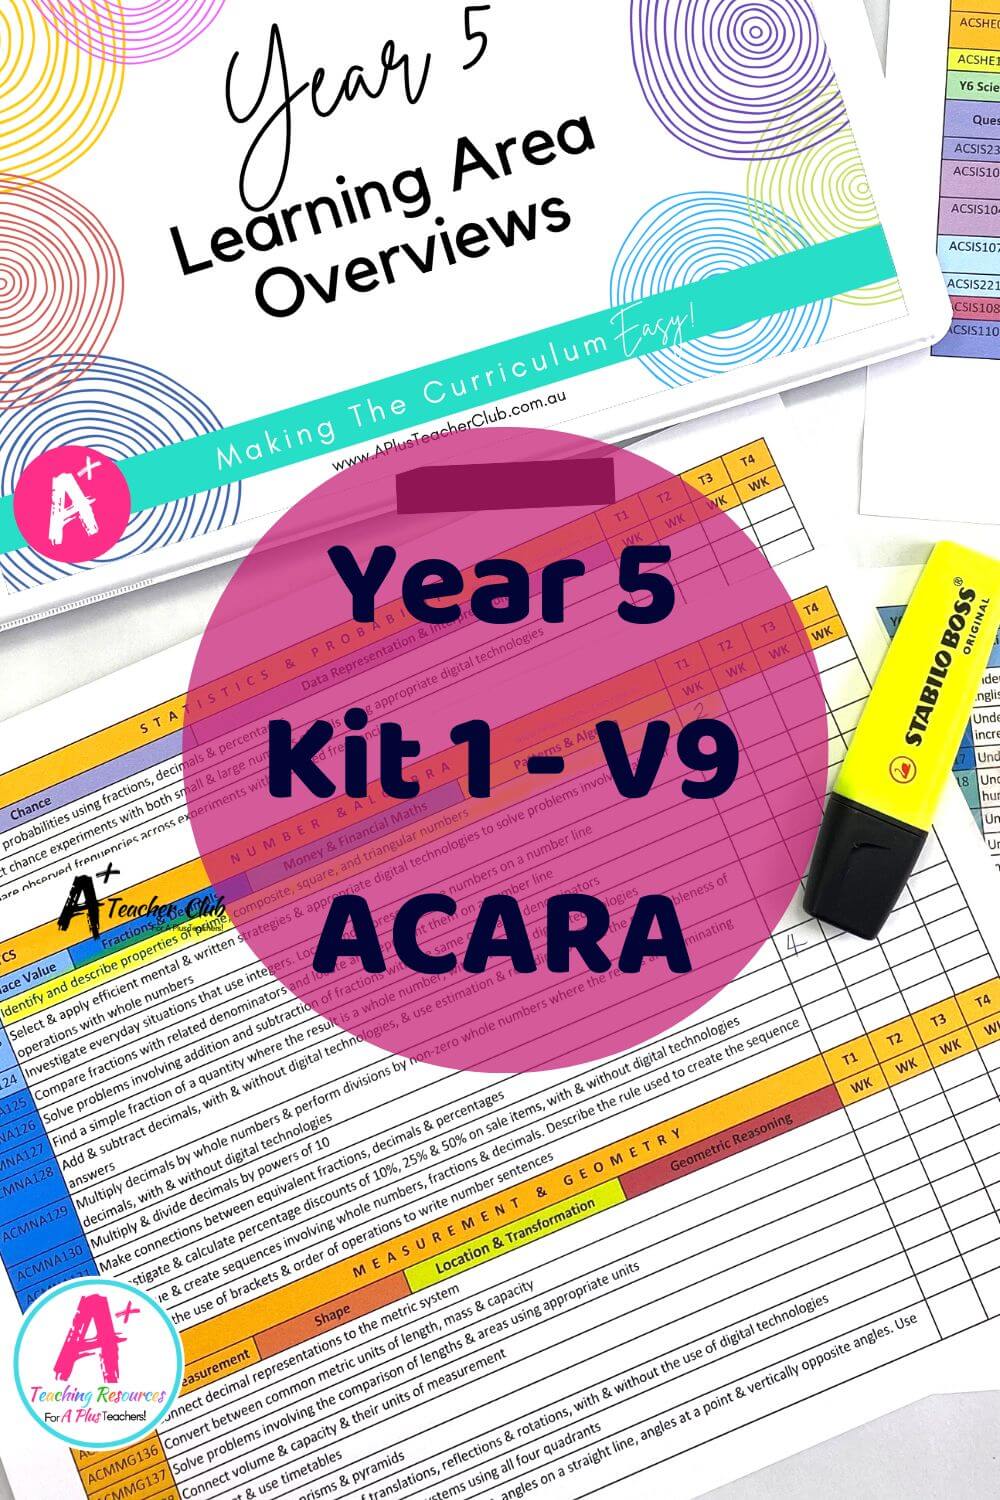 Year 5 Forward Planning Curriculum Overview ACARA V9